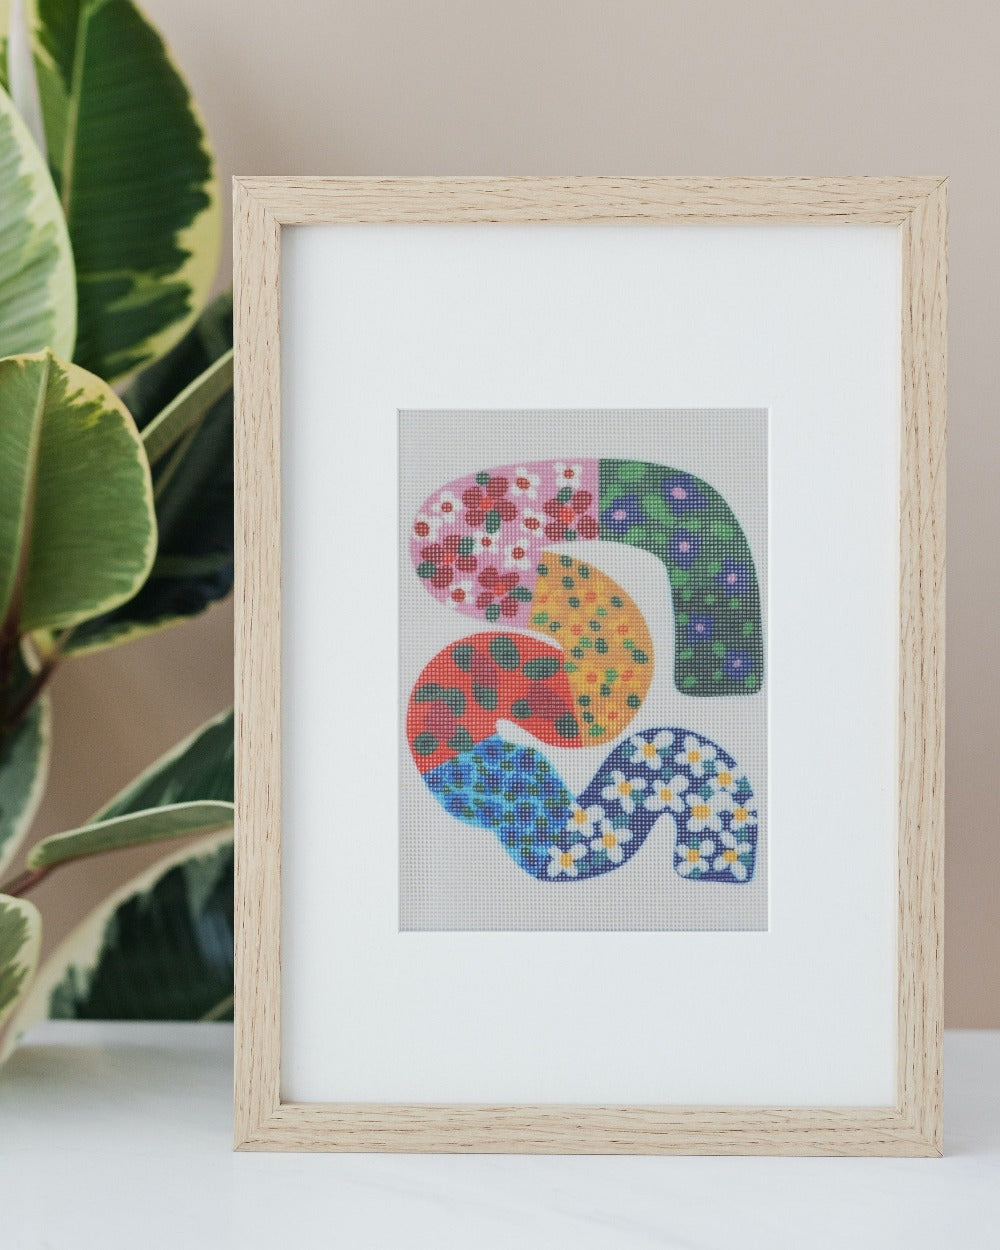 Sunflower abstract and floral design for a needlepoint kit by Unwind Studio in collaboration with artist Melanie Macilwain. Needlepoint piece framed for home decor